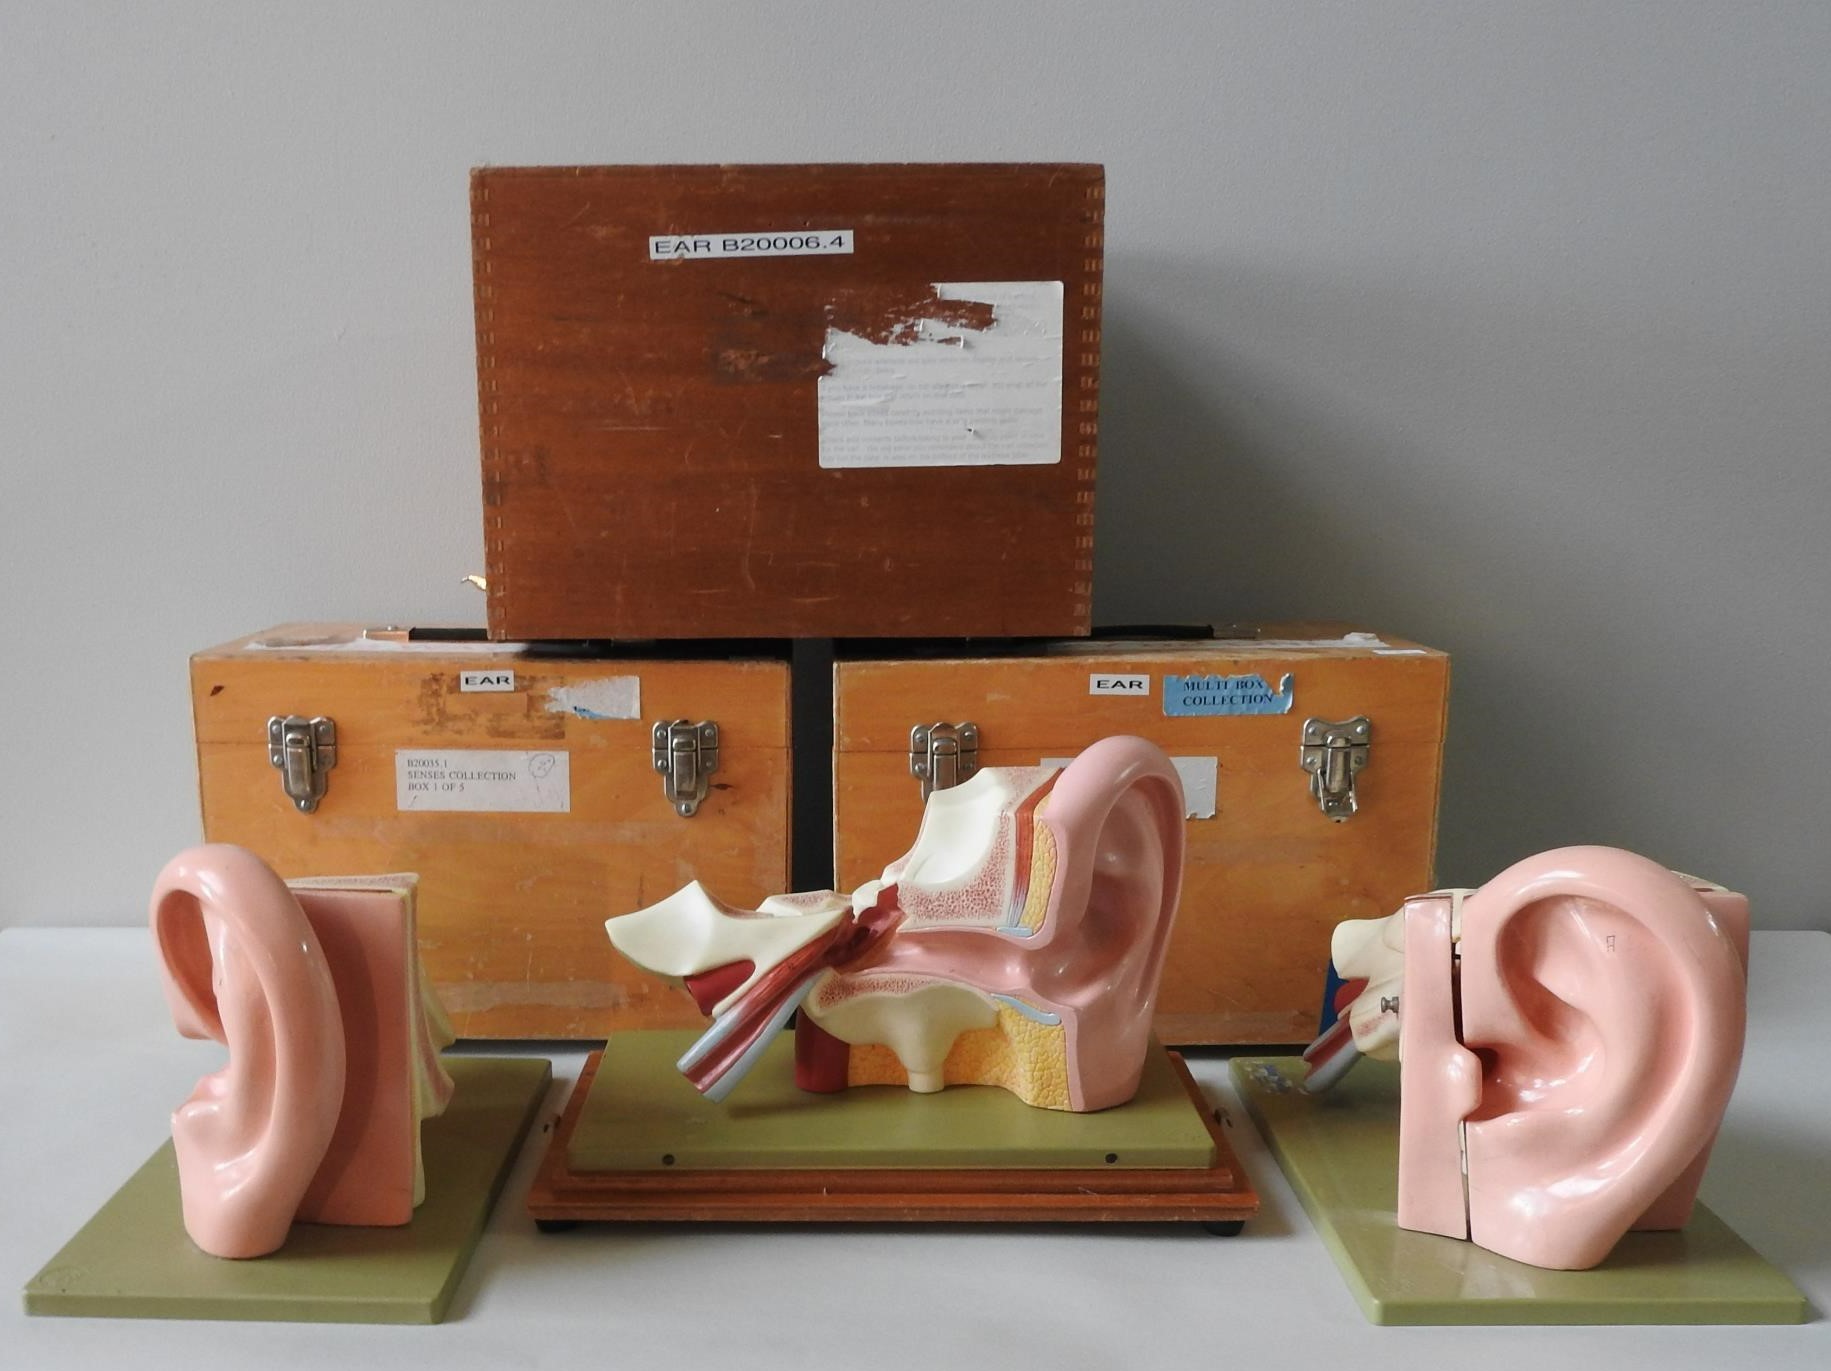 THREE VINTAGE SOMSO HUMAN ANATOMY MODELS OF THE EAR CANAL, two of which have missing components, all - Image 3 of 3